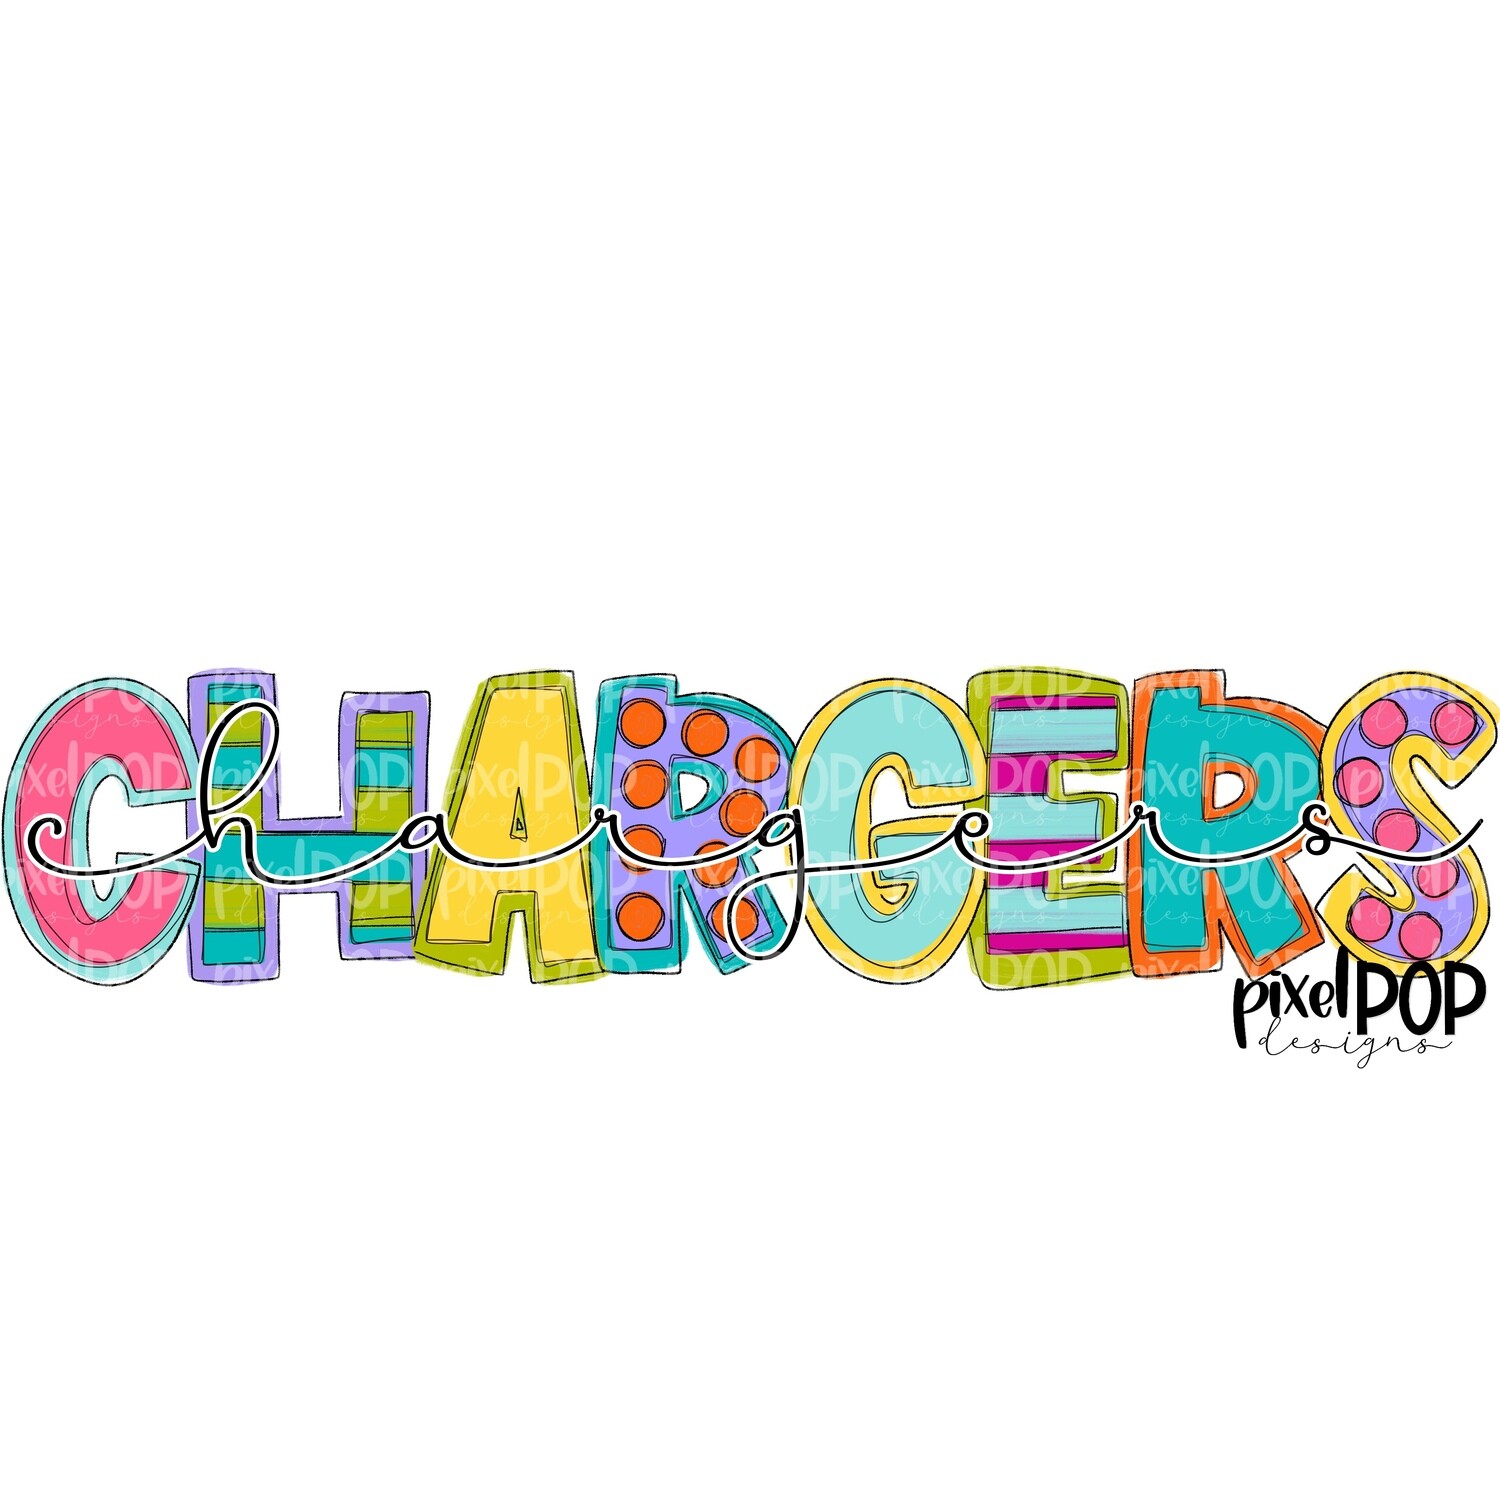 Funky Block and Script Mascots Chargers PNG | Team Sublimation Design | Team Spirit Design | Chargers Clip Art | Digital Download | Printable Artwork